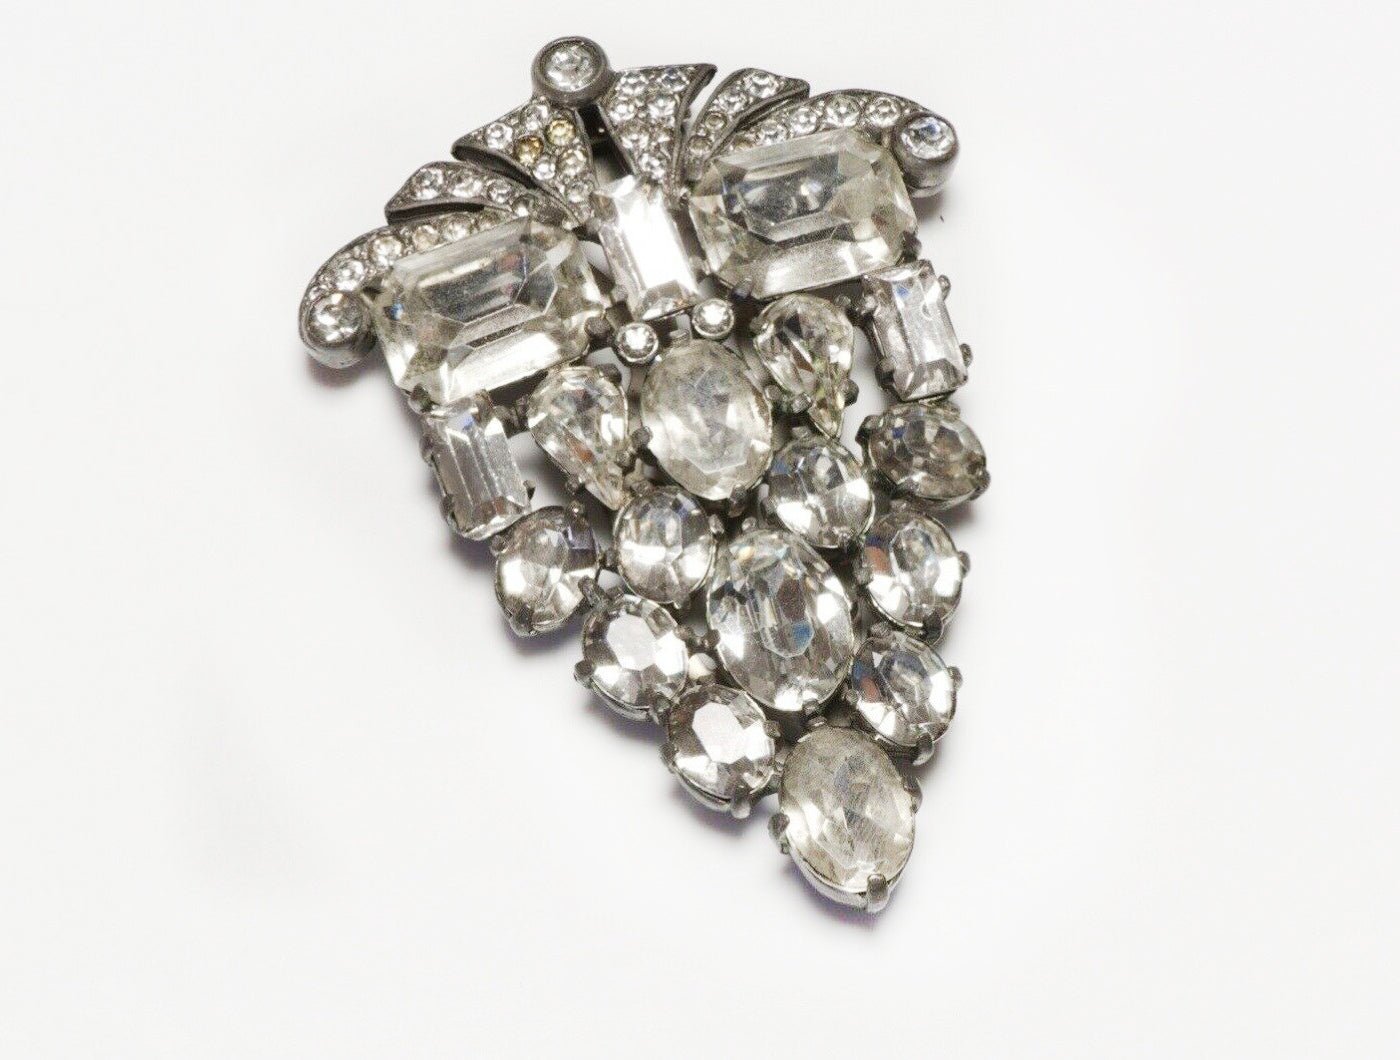 Eisenberg Vintage Jewelry - Beauty and Style at Affordable Prices - DSF Antique Jewelry